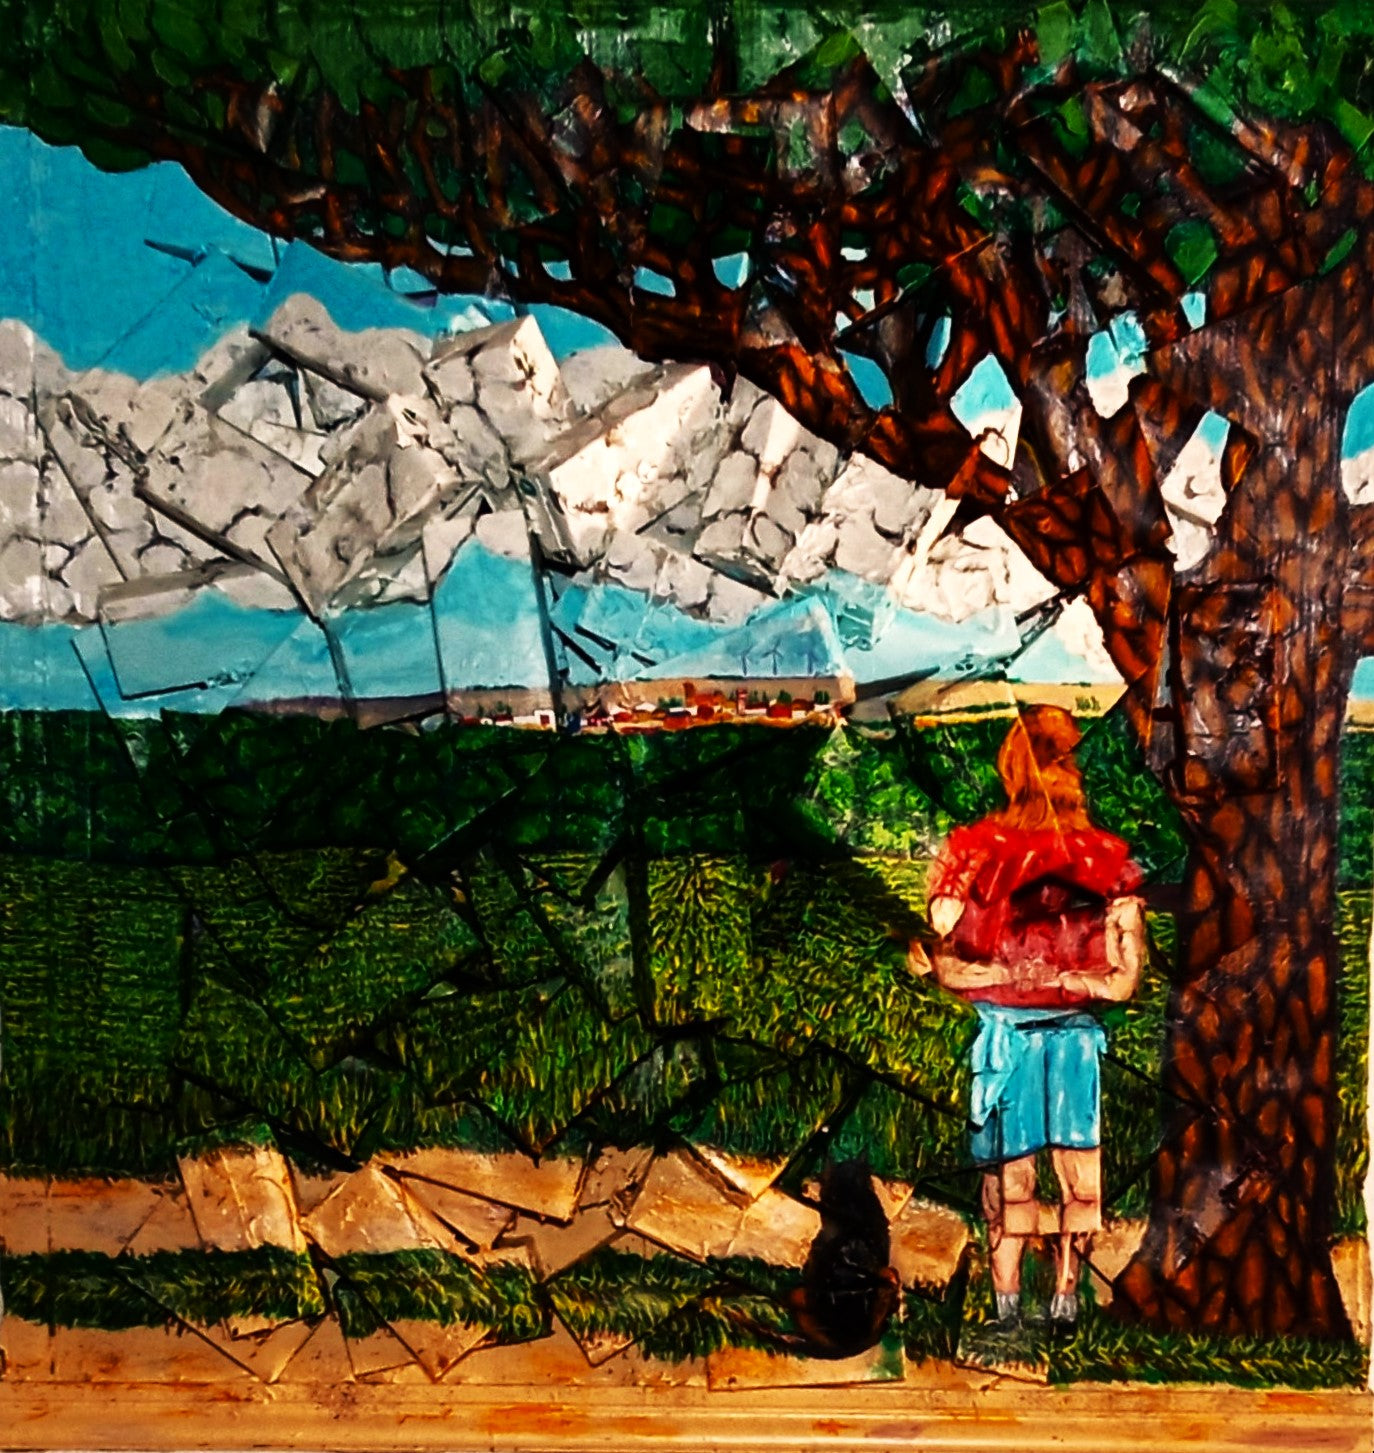 3D Self-portrait with Enzo and La Zarza in the distance. Ivan Fyodorovich. Acrylic on Recycled Tetra briks